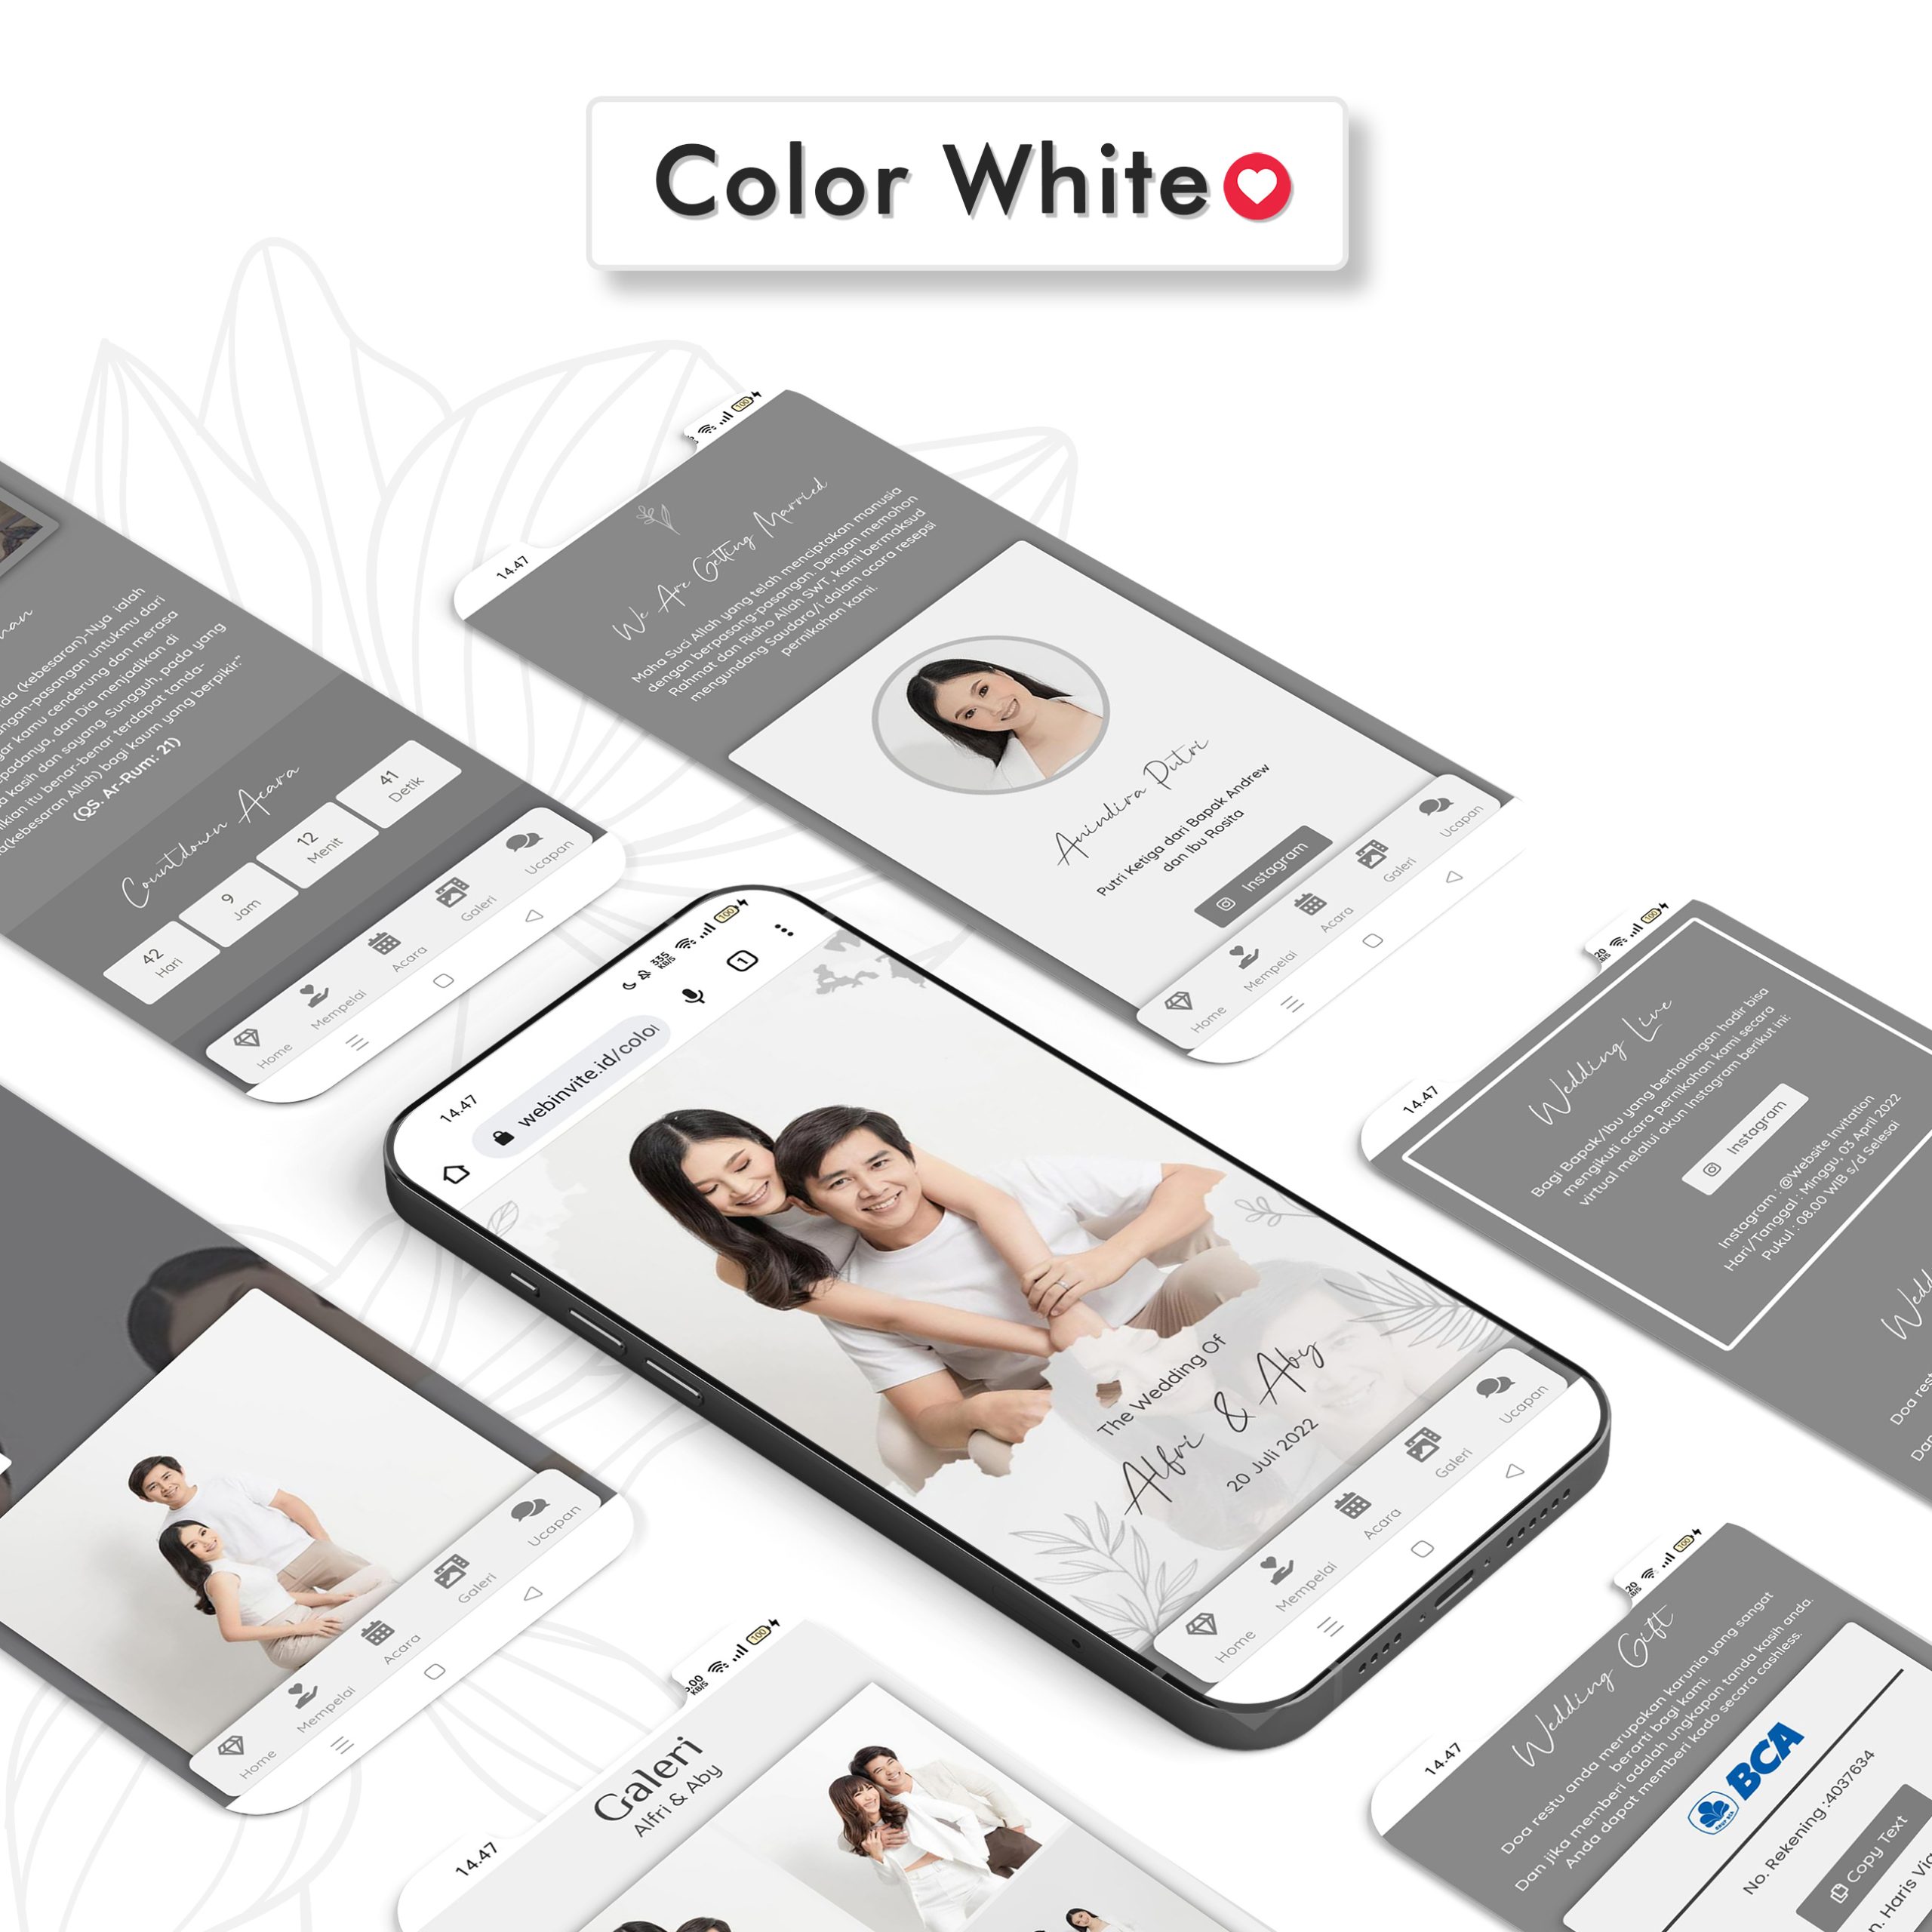 Color White Scaled.jpg